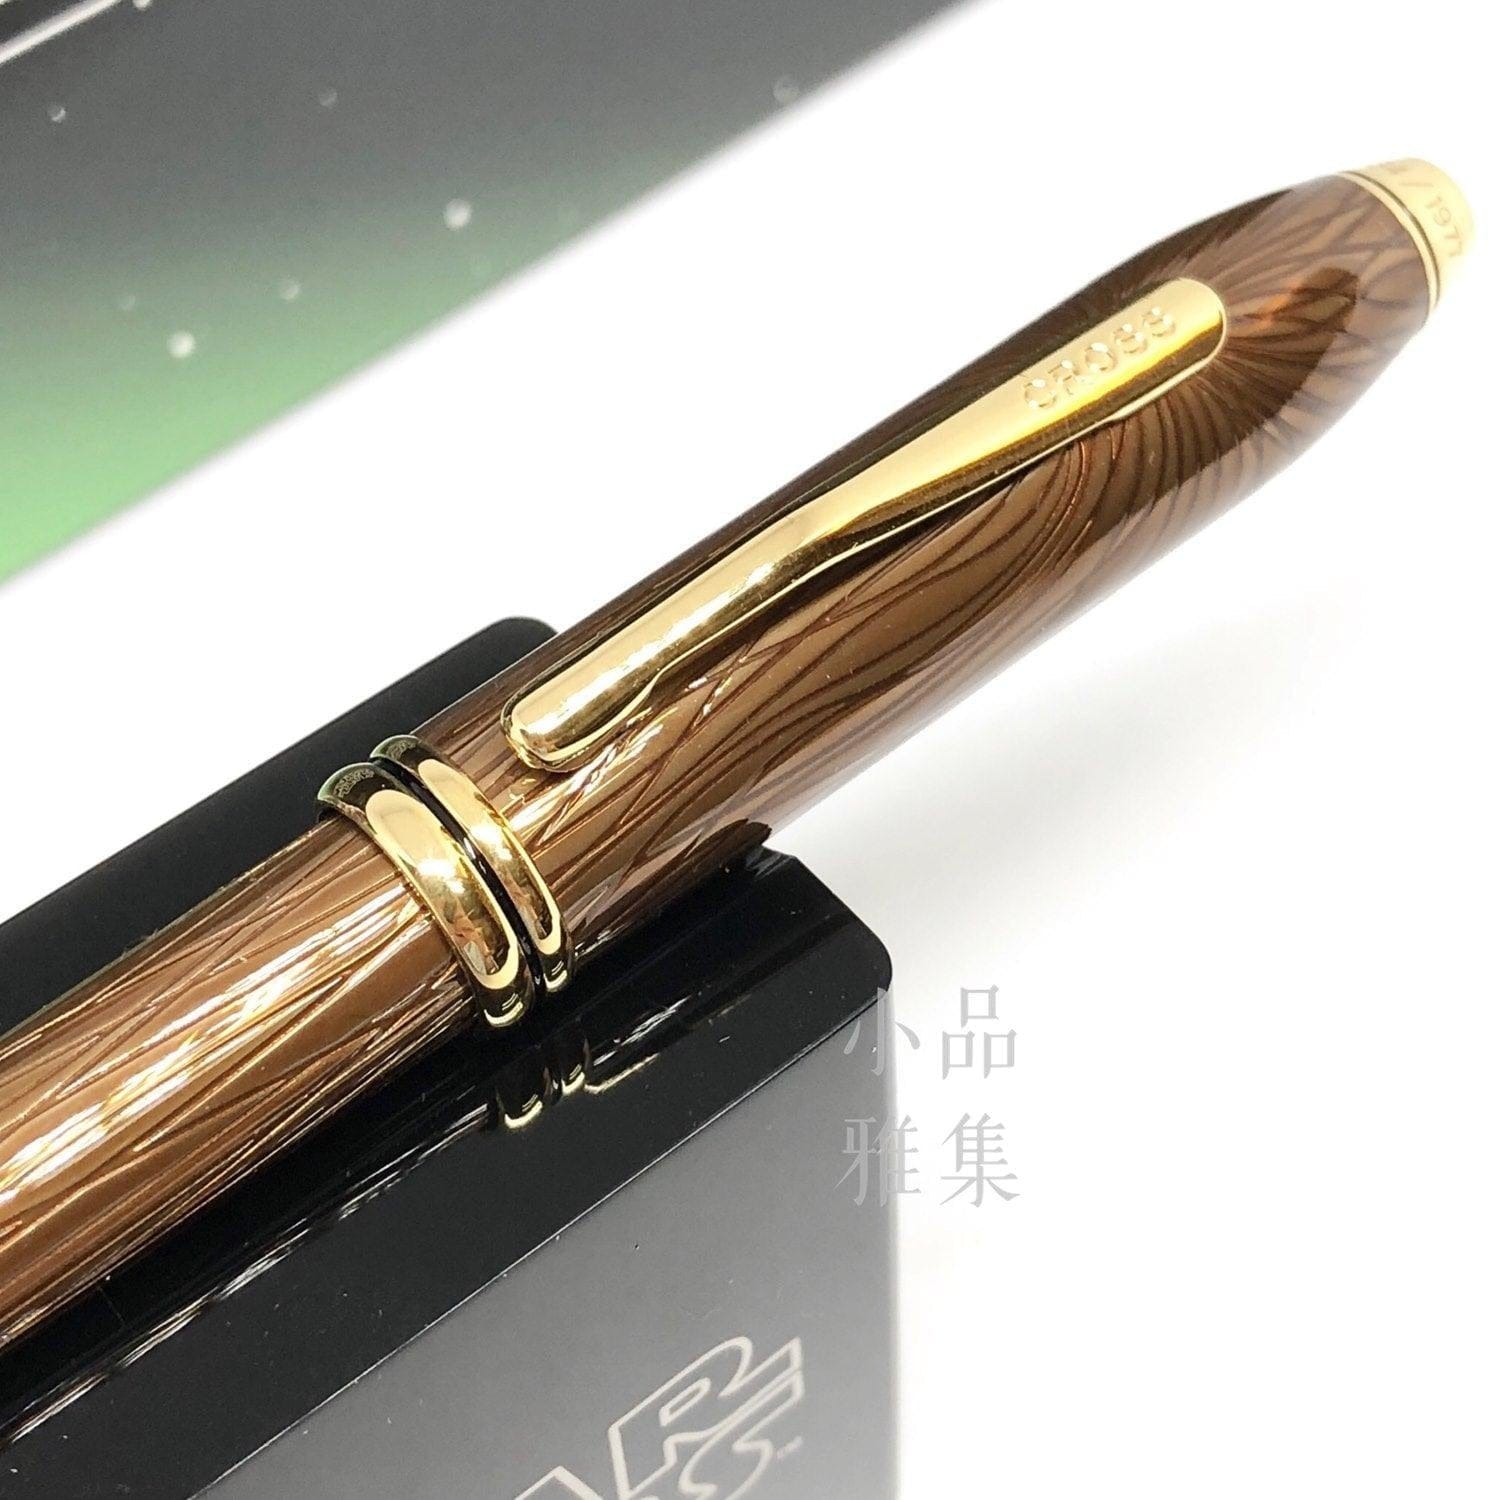 Gourmet Pens: Cross Townsend Star Wars Limited Edition Chewbacca